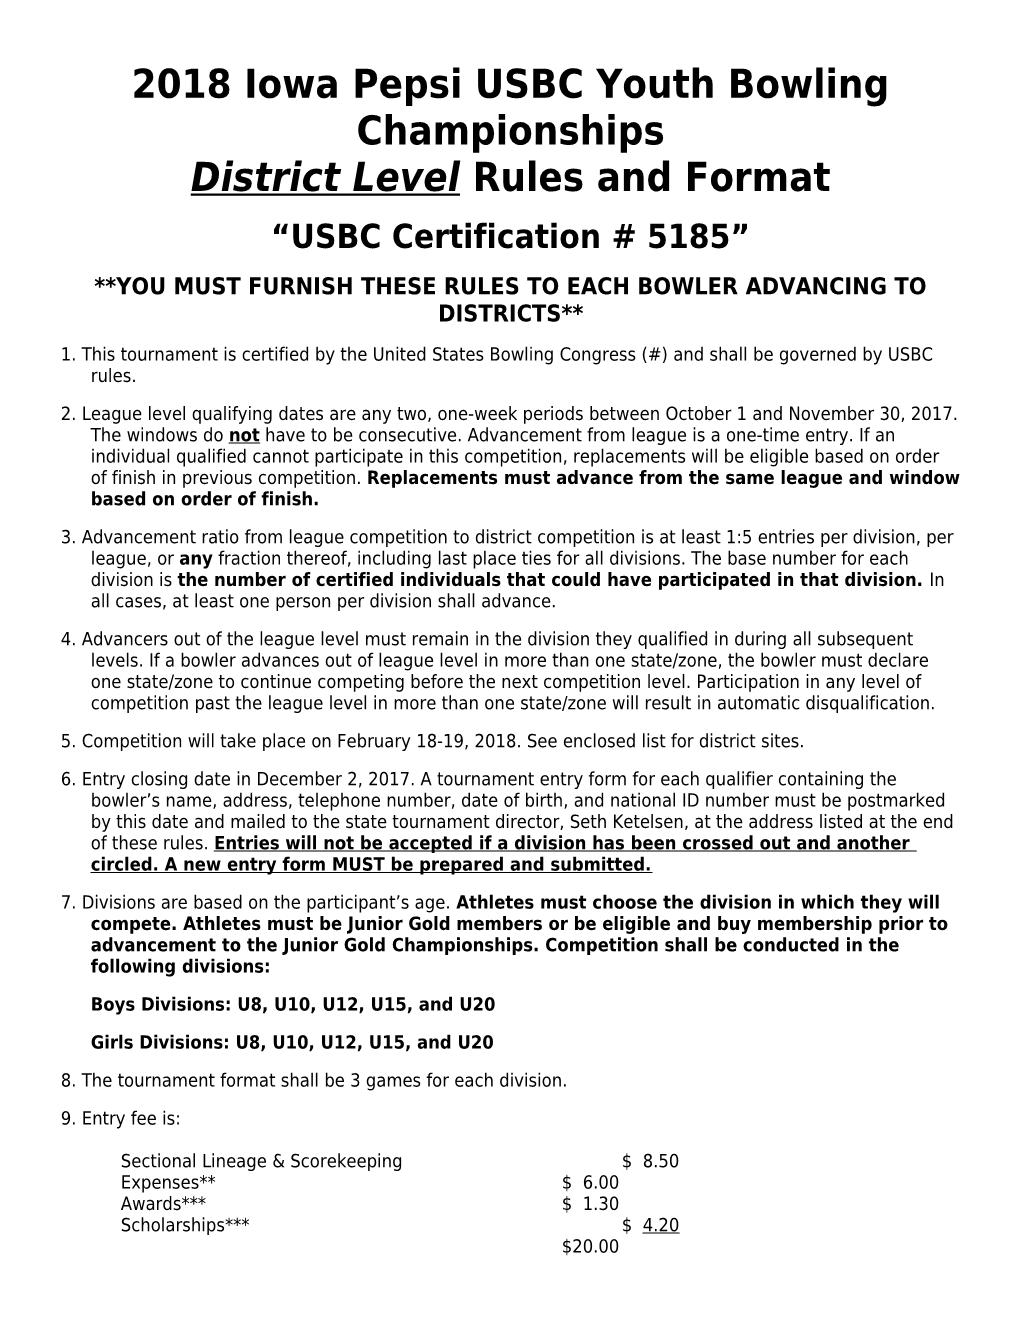 You Must Furnish These Rules to Each Bowler Advancing to Districts